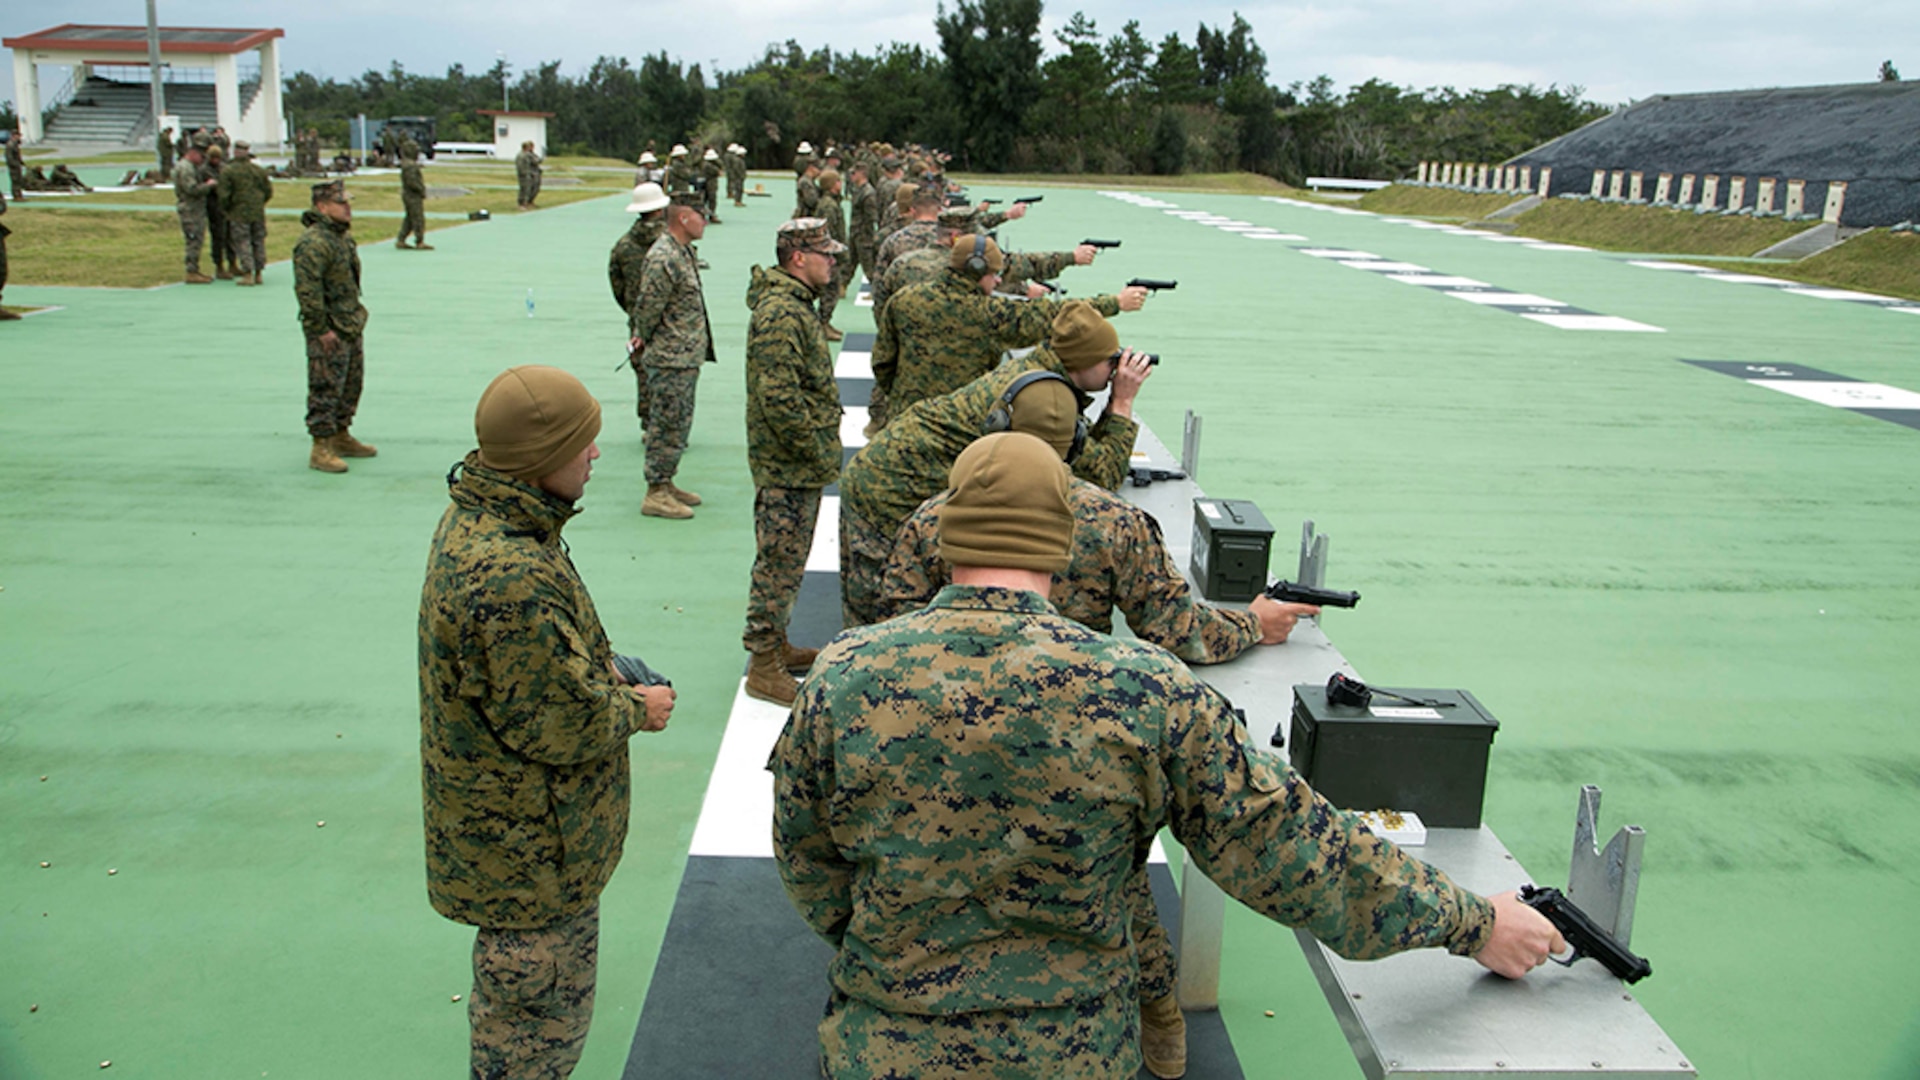 Shooters fire pistols during the Far East Division Marksmanship Match Dec. 17 aboard Camp Hansen, Okinawa, Japan. The competition consisted of classes, practice, and qualifications for both pistol and rifle marksmanship. Marine Aircraft Team 36 won the pistol marksmanship competition and 4th Marine Regiment won the rifle marksmanship competition. 